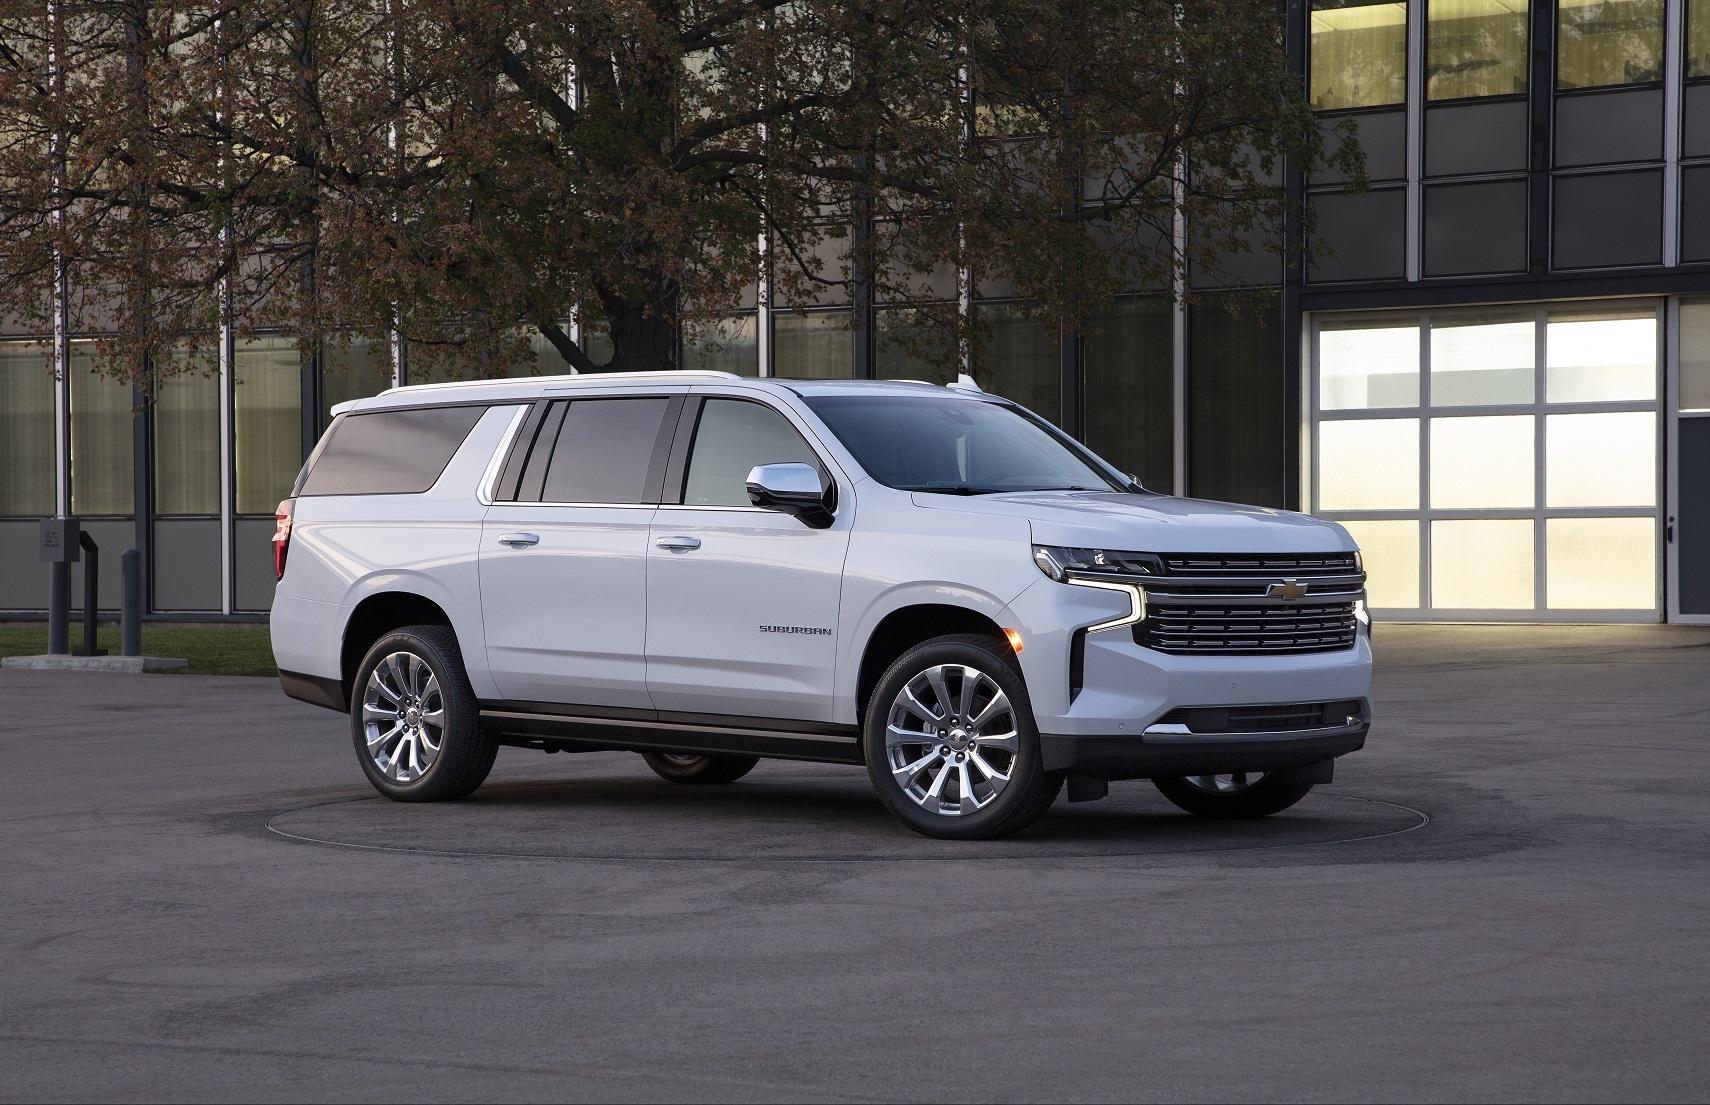 Meet the Chevrolet 2020 SUV Line-Up